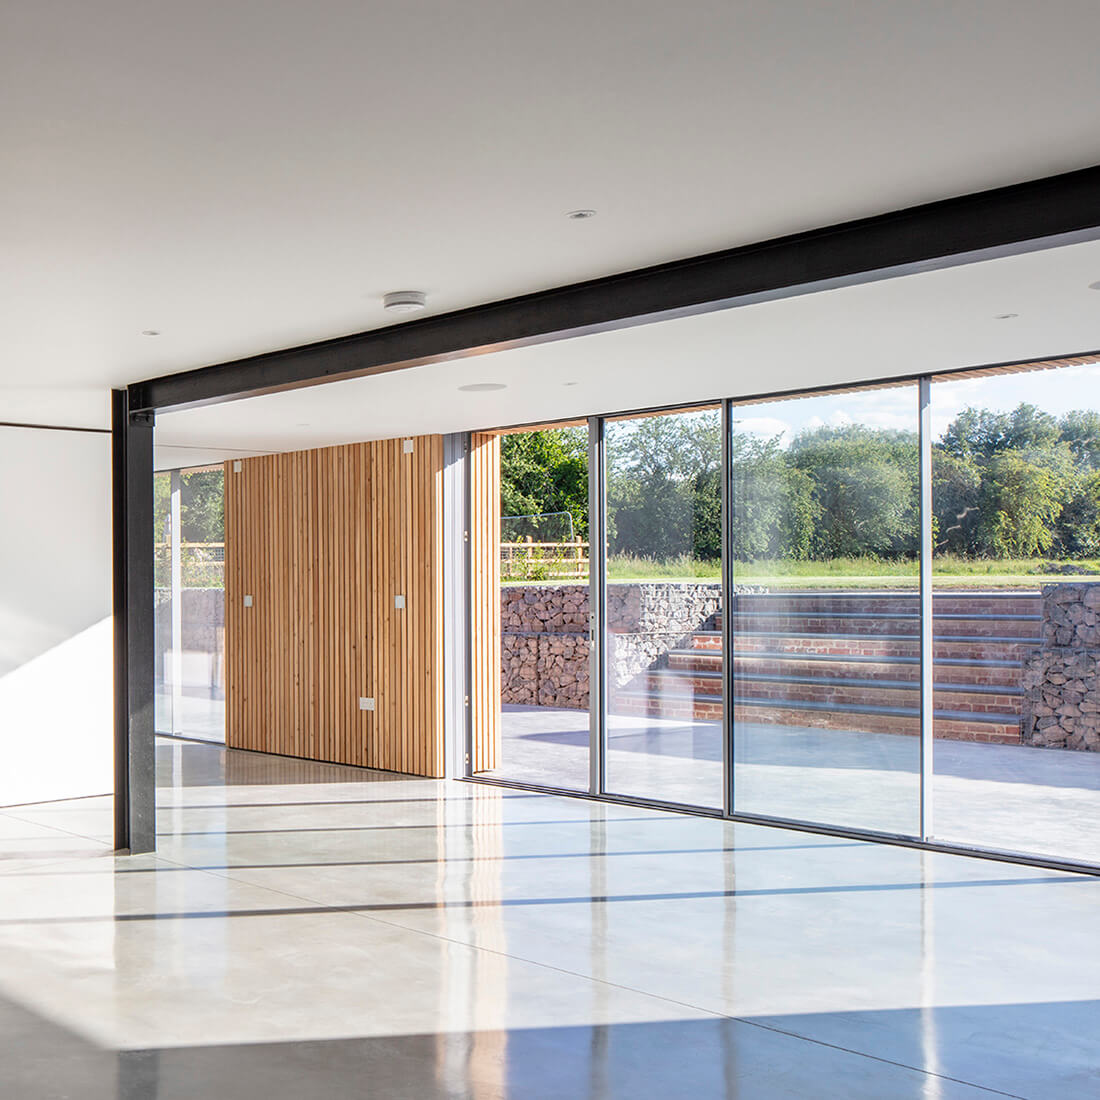 Aluminium Sliding Doors with steps and bushes in background